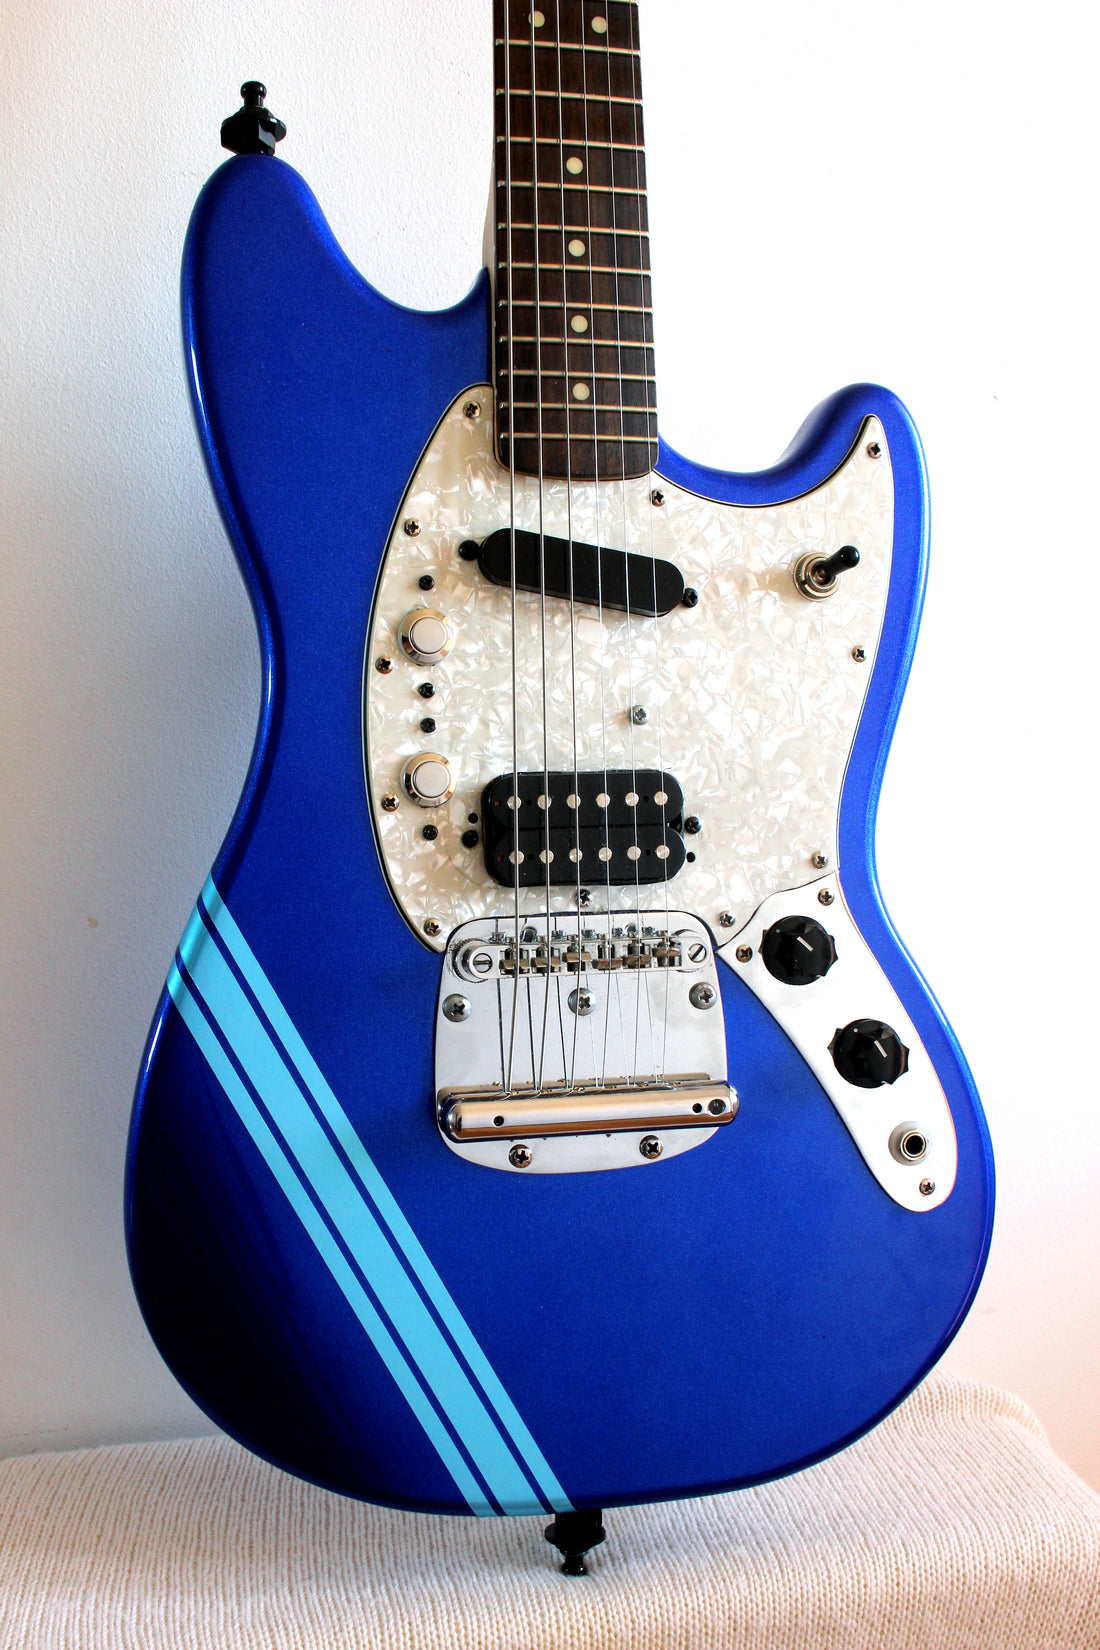 Used Squier Vintage Modified Mustang Competiton Blue Modded